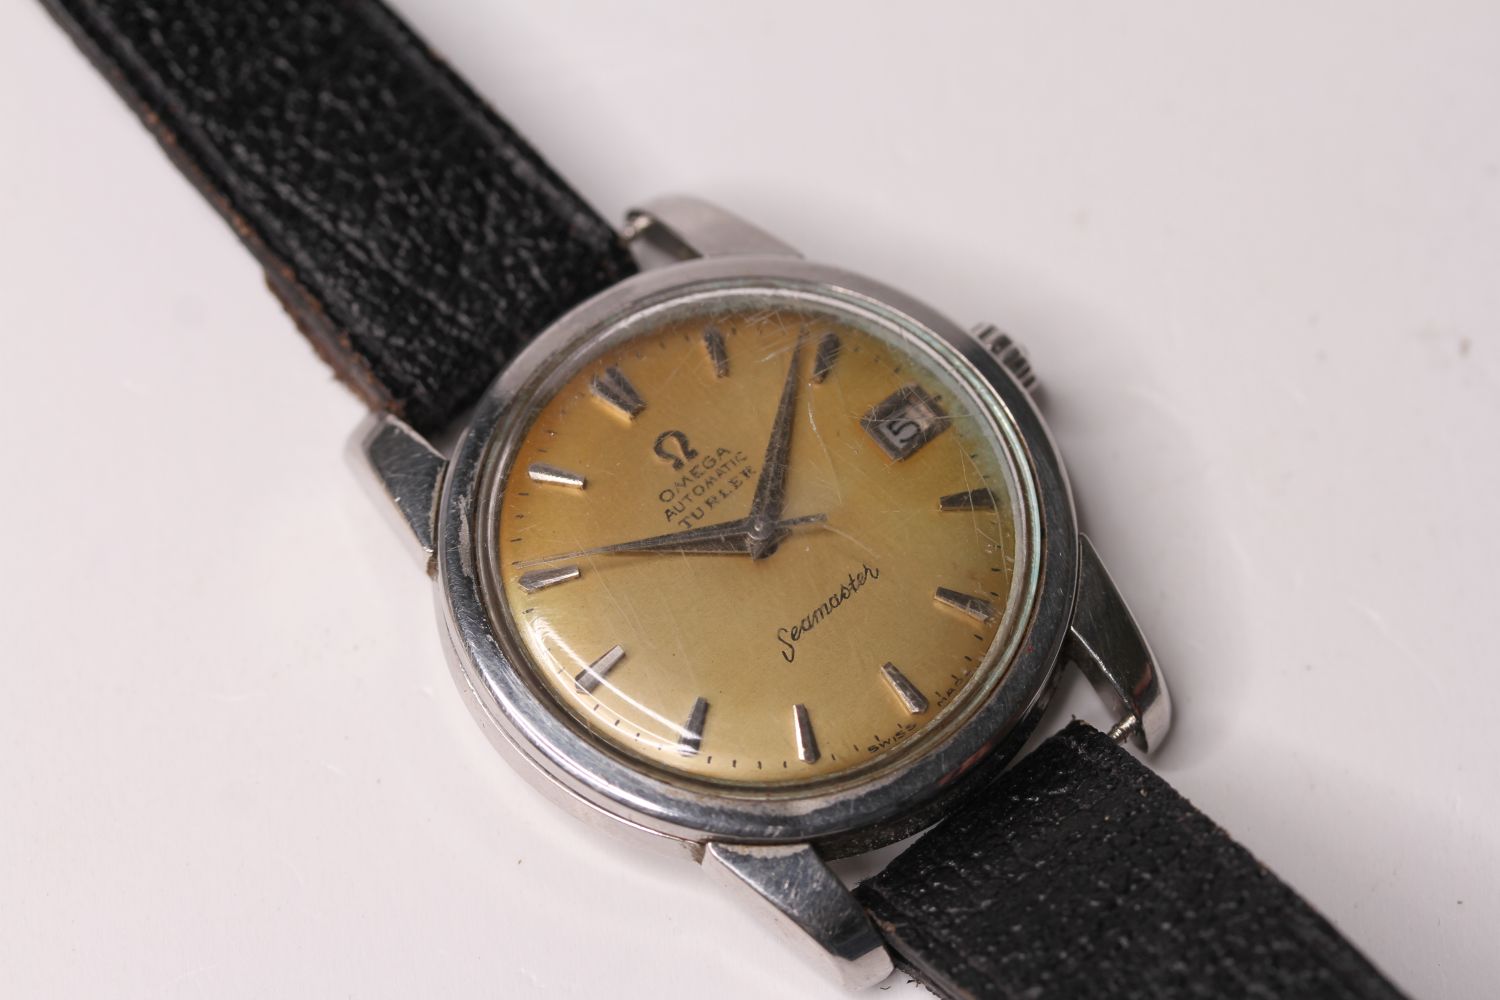 VINTAGE OMEGA SEAMASTER AUTOMATIC WITH TURLER RETAIL SIGNATURE, circular cream dial with applied